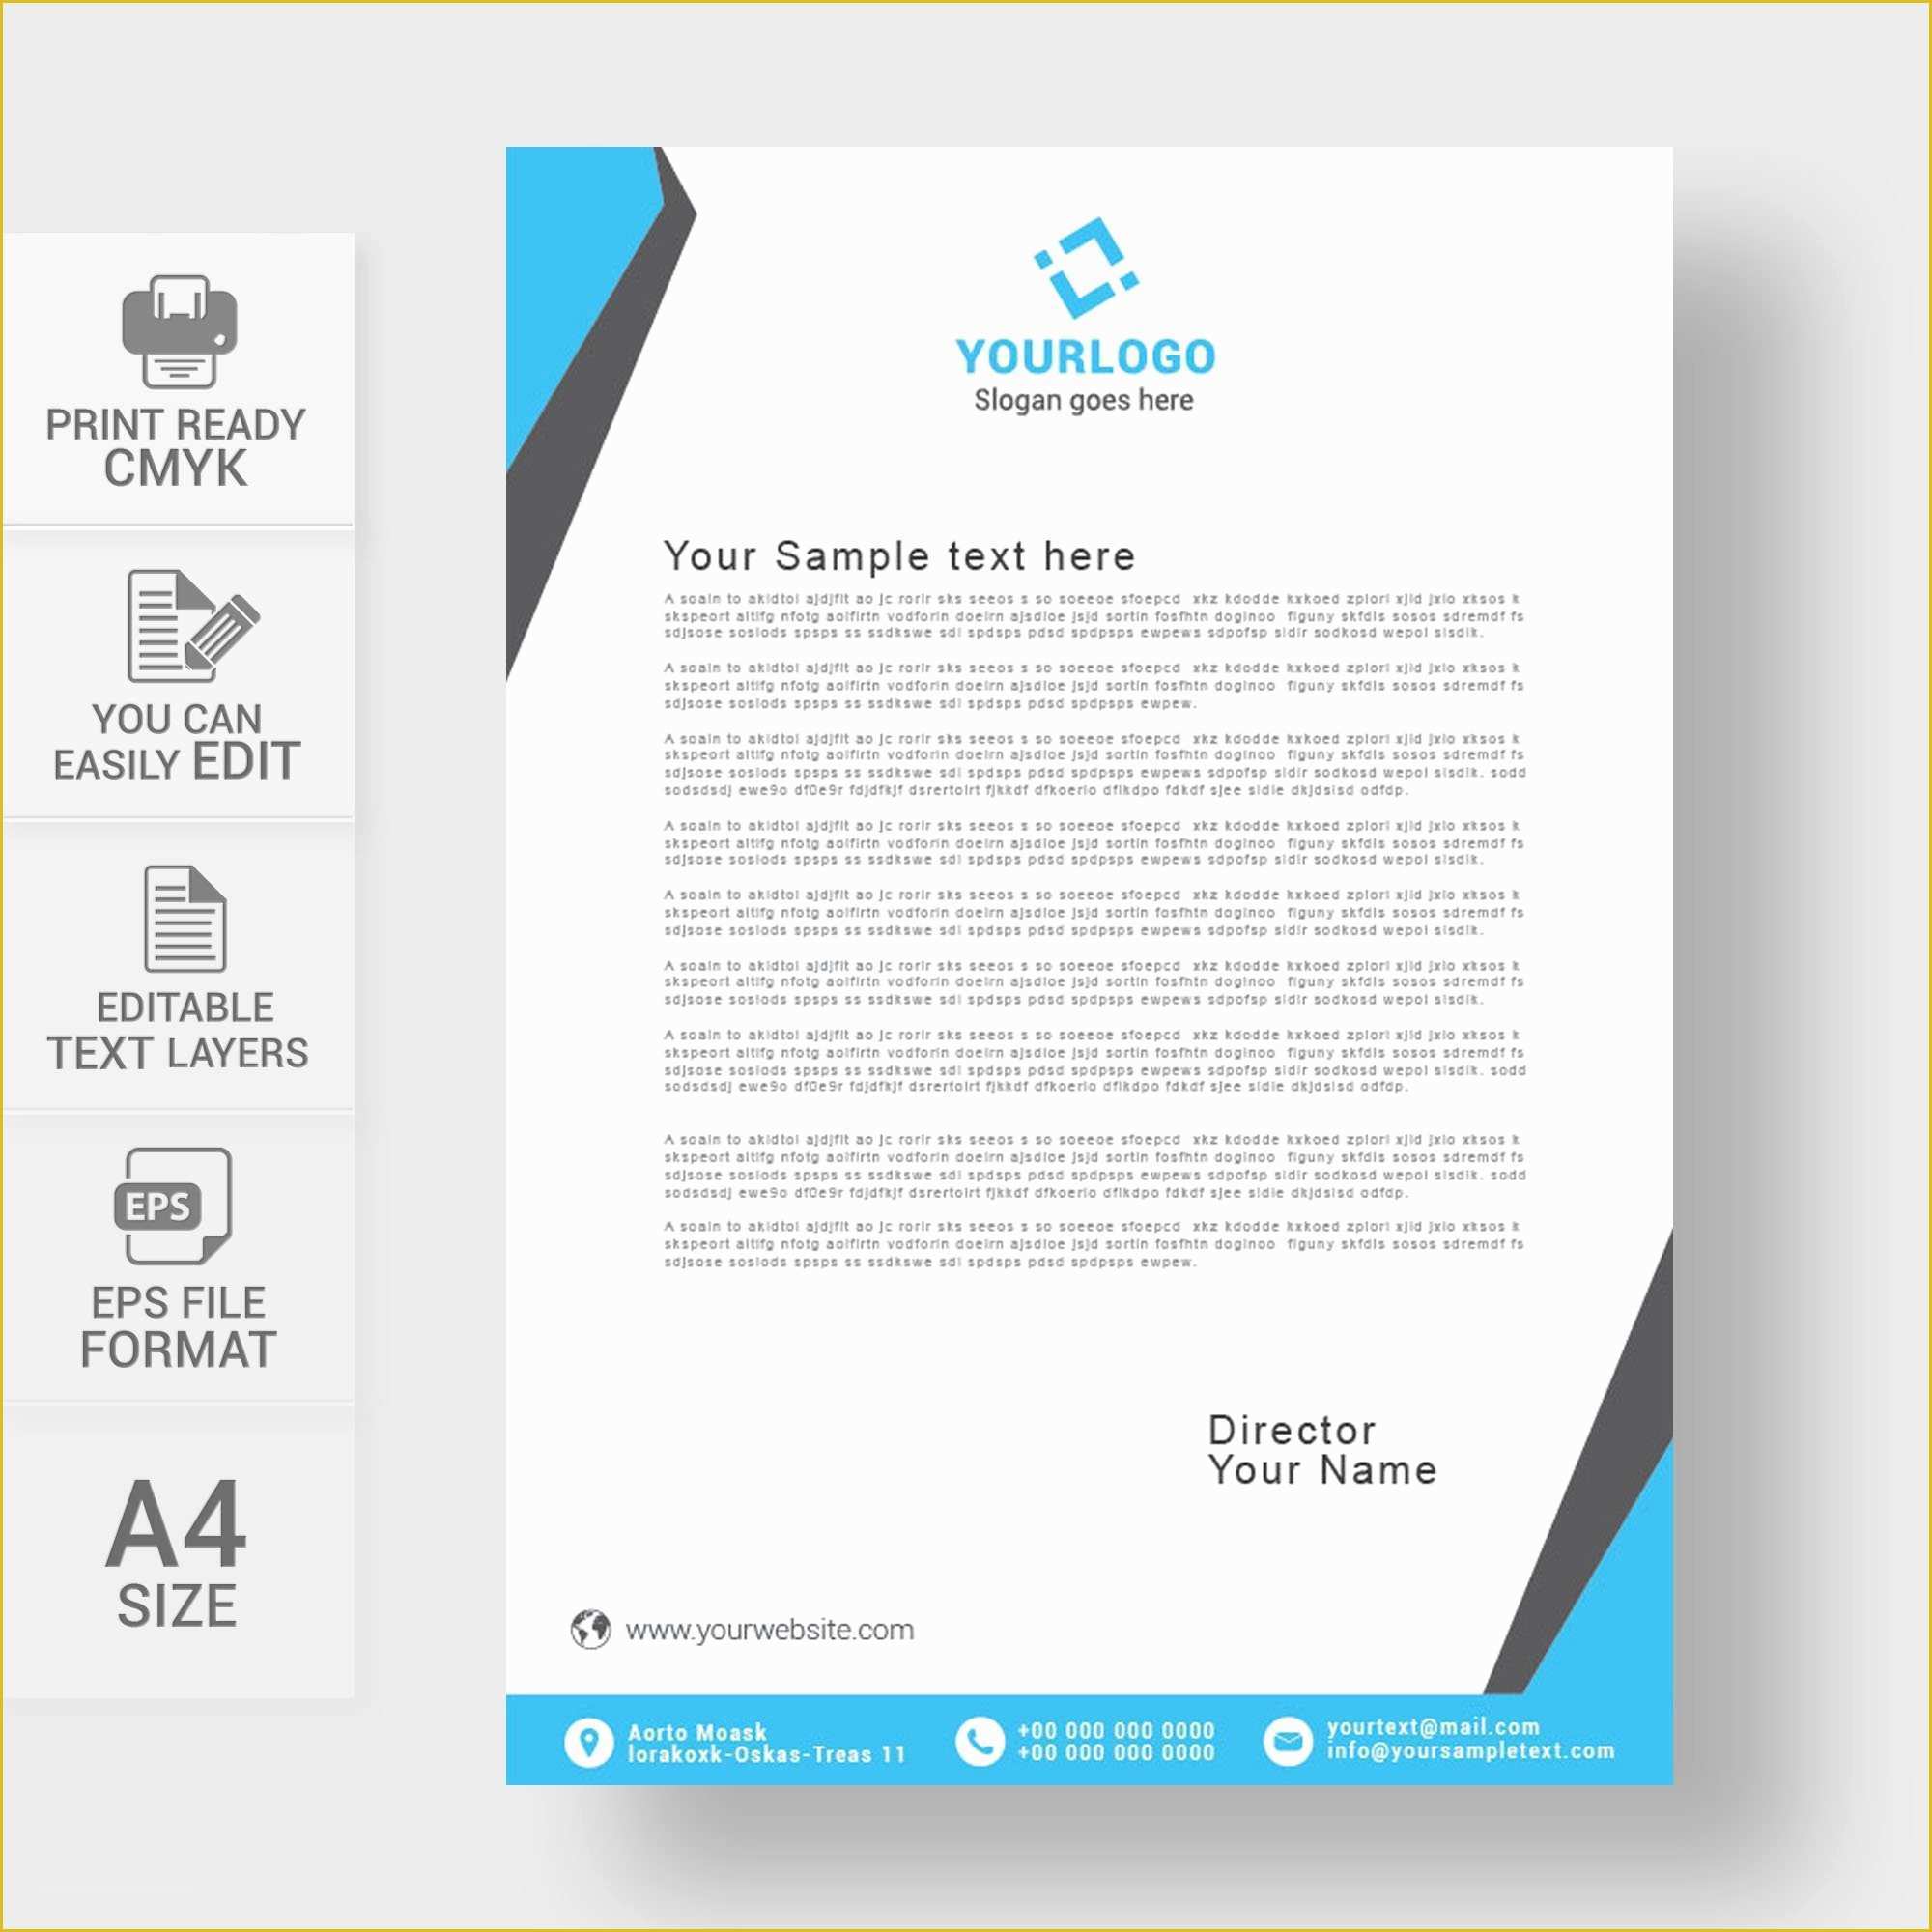 Free Letter Headed Paper Templates Download Of Letter Headed Paper Design Template Refrence Letterhead